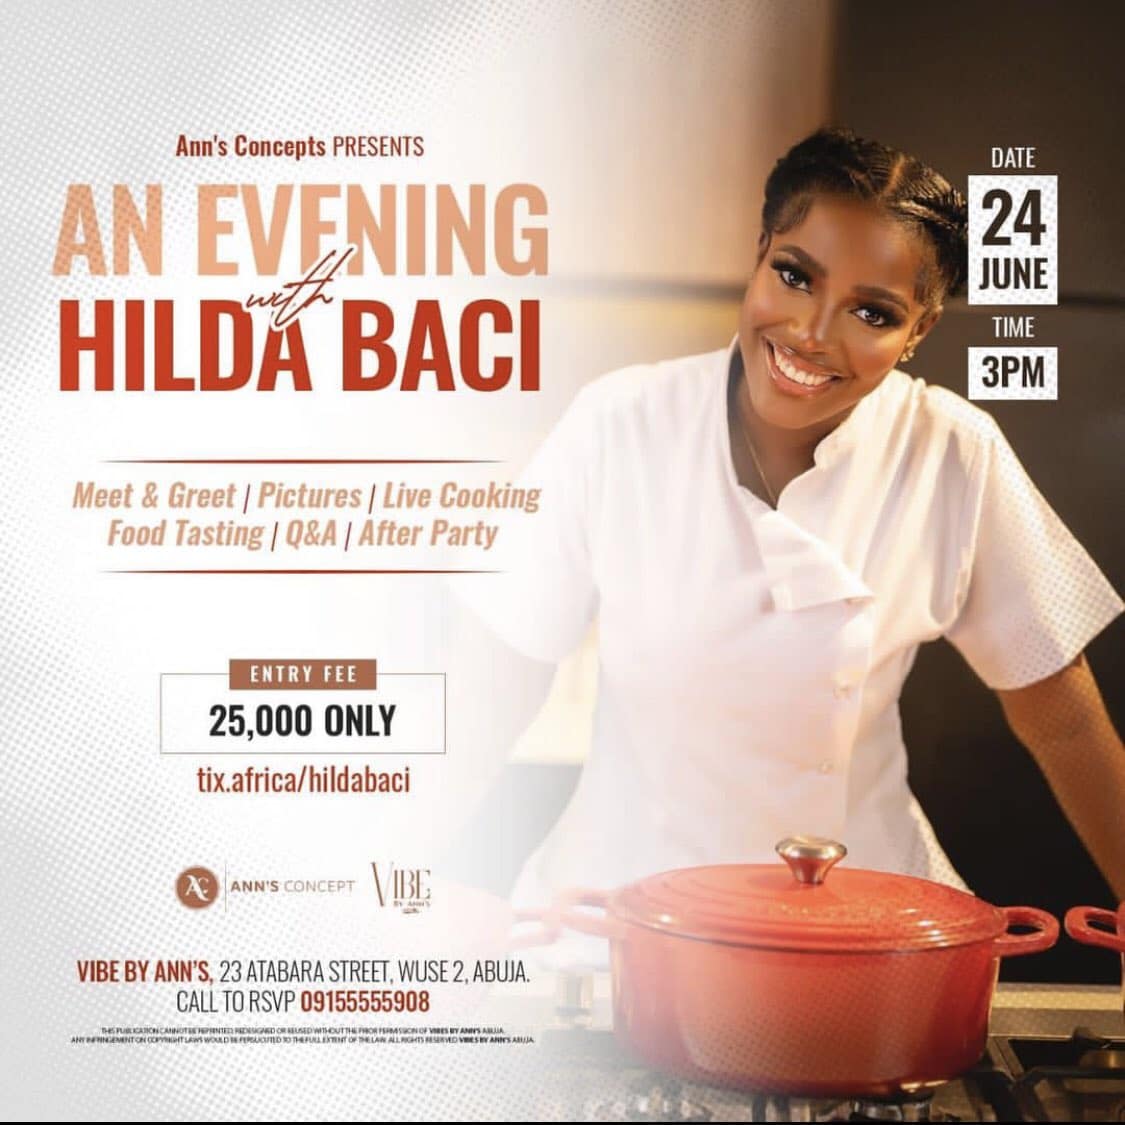 Hilda Baci allegedly charges N25k for meet and greet